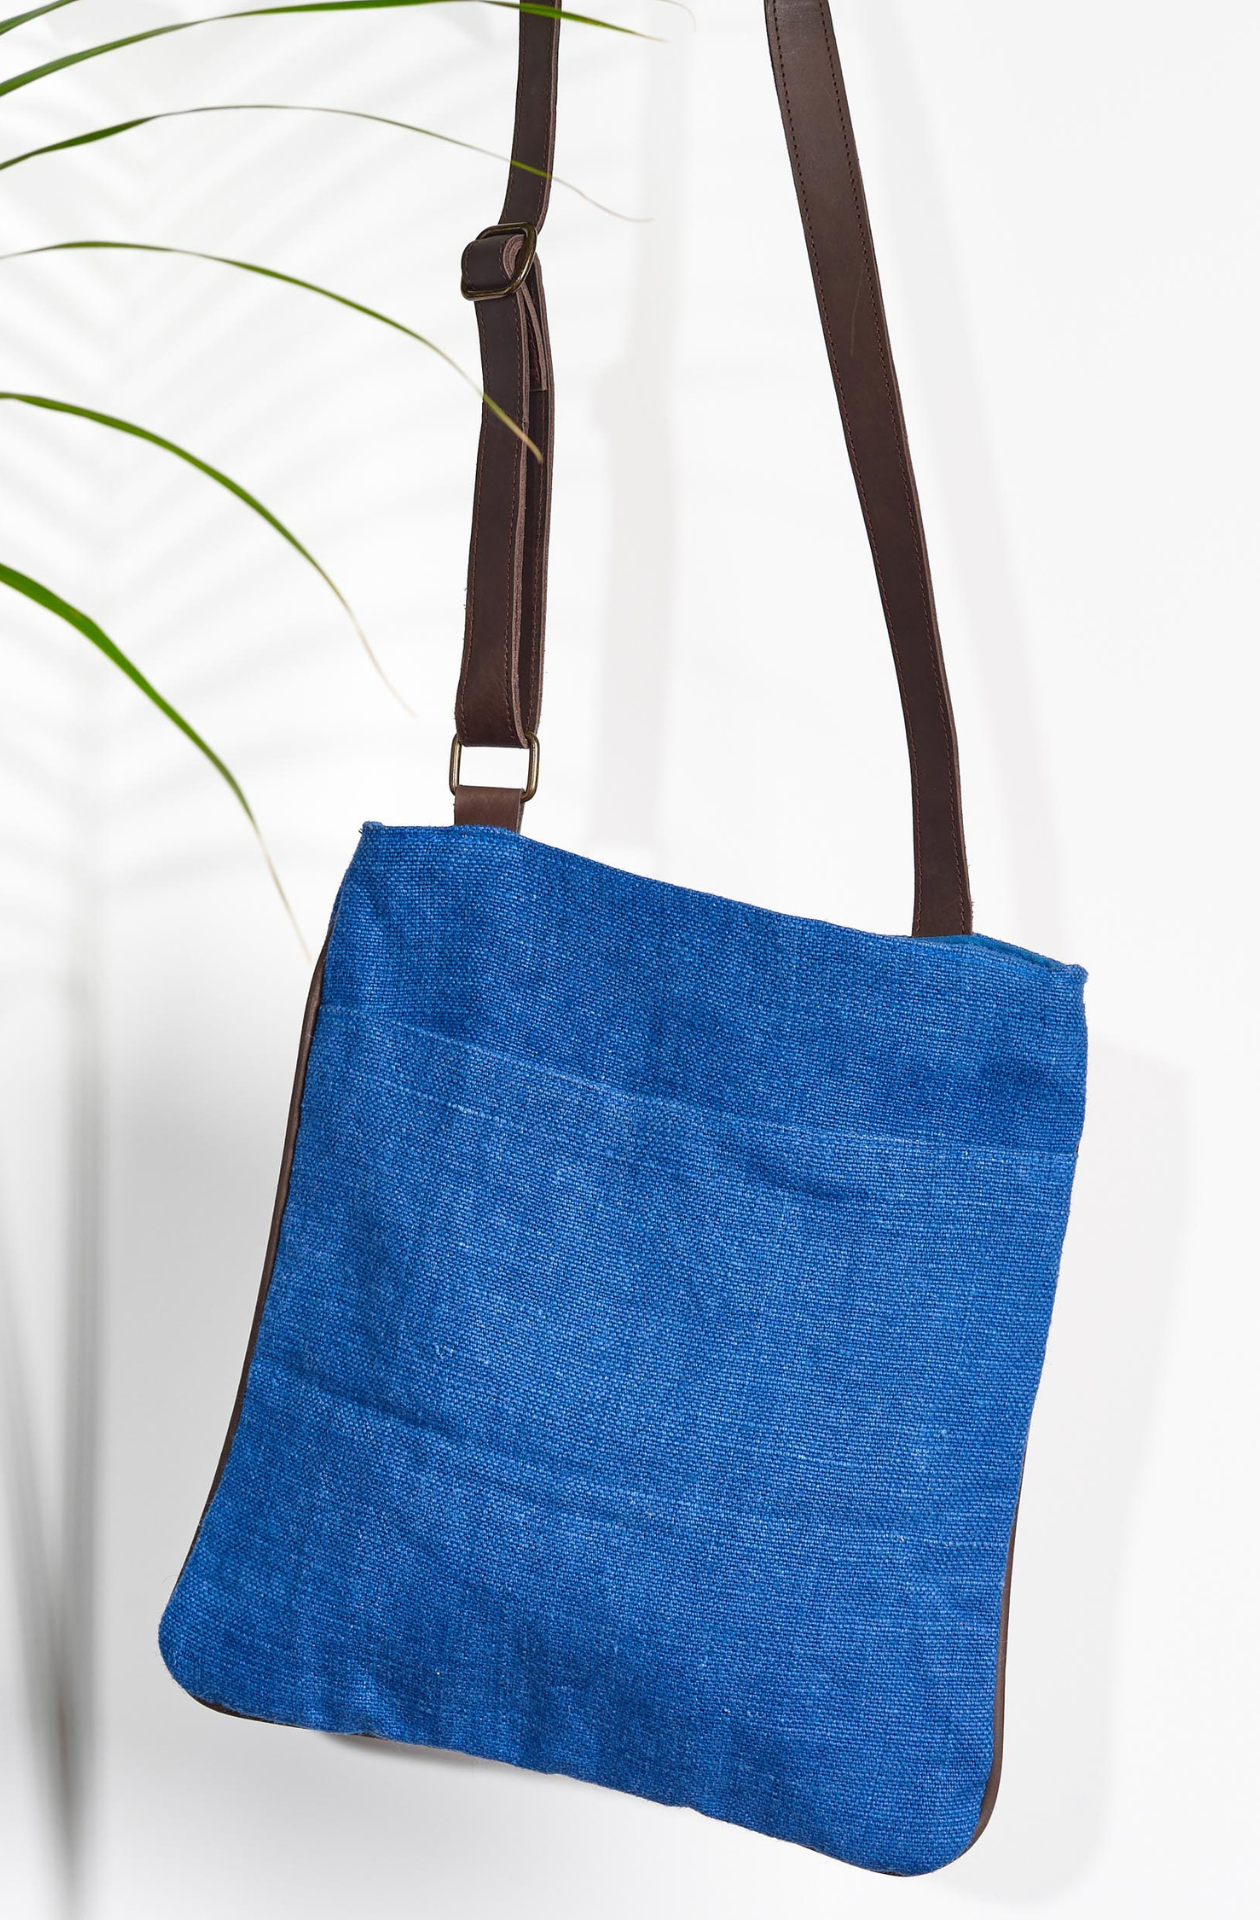 The "Cobalt" variant of the Hold Me Close Cross Body Bag. It is a vivid blue with an open front pocket with matching piped leather around the outside. An adjustable dark brown strap is connected on either side of the bag.